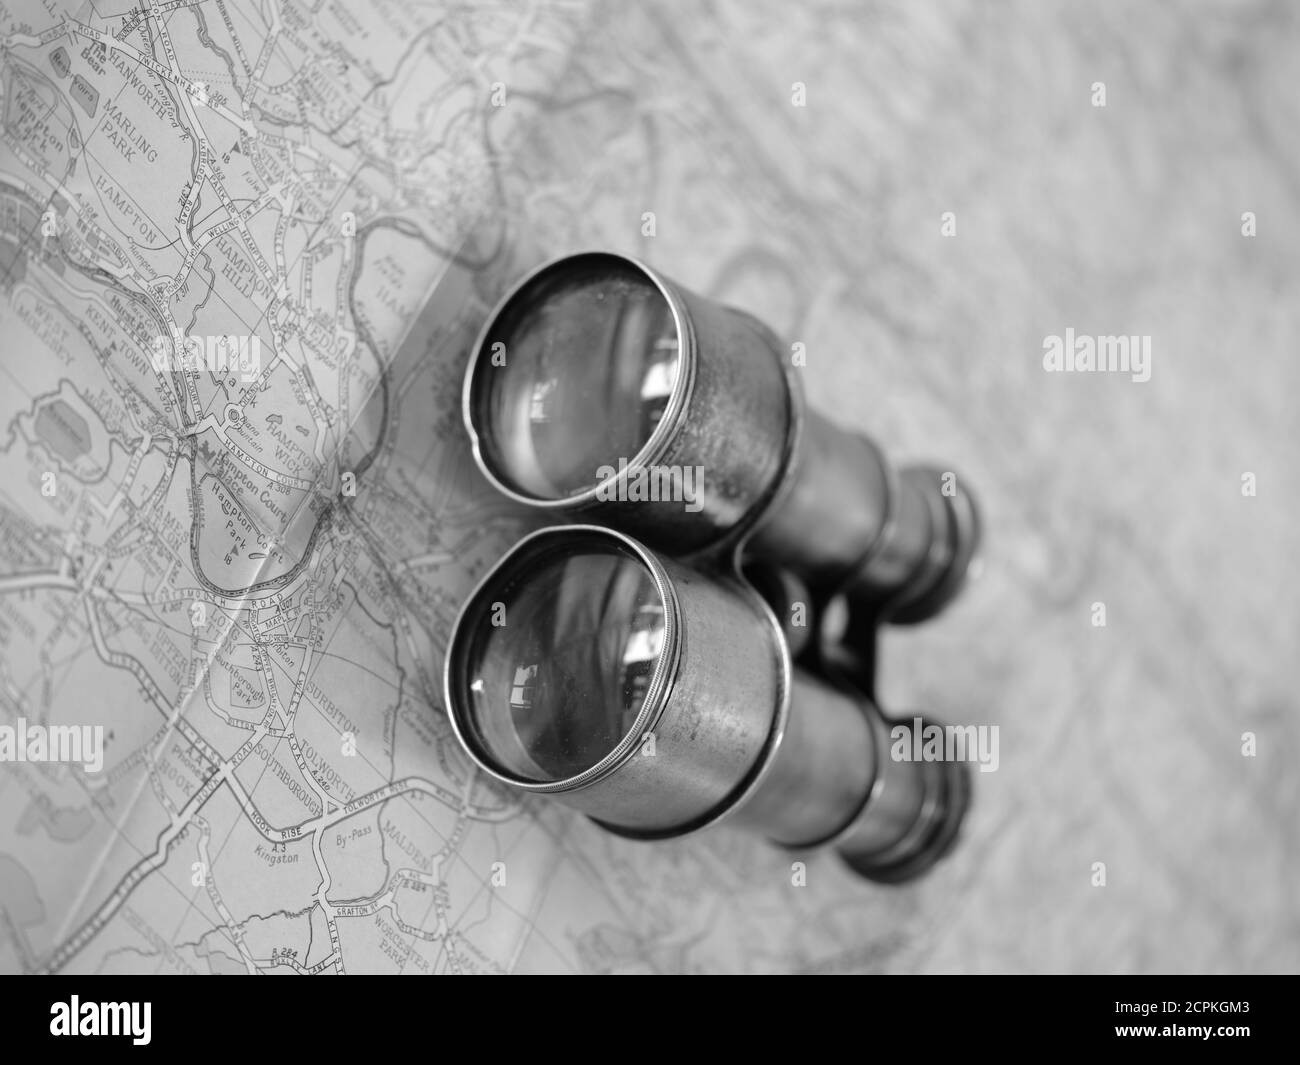 VINTAGE BINOCULARS AND VINTAGE MAP OF LONDON AND THE THAMES Stock Photo